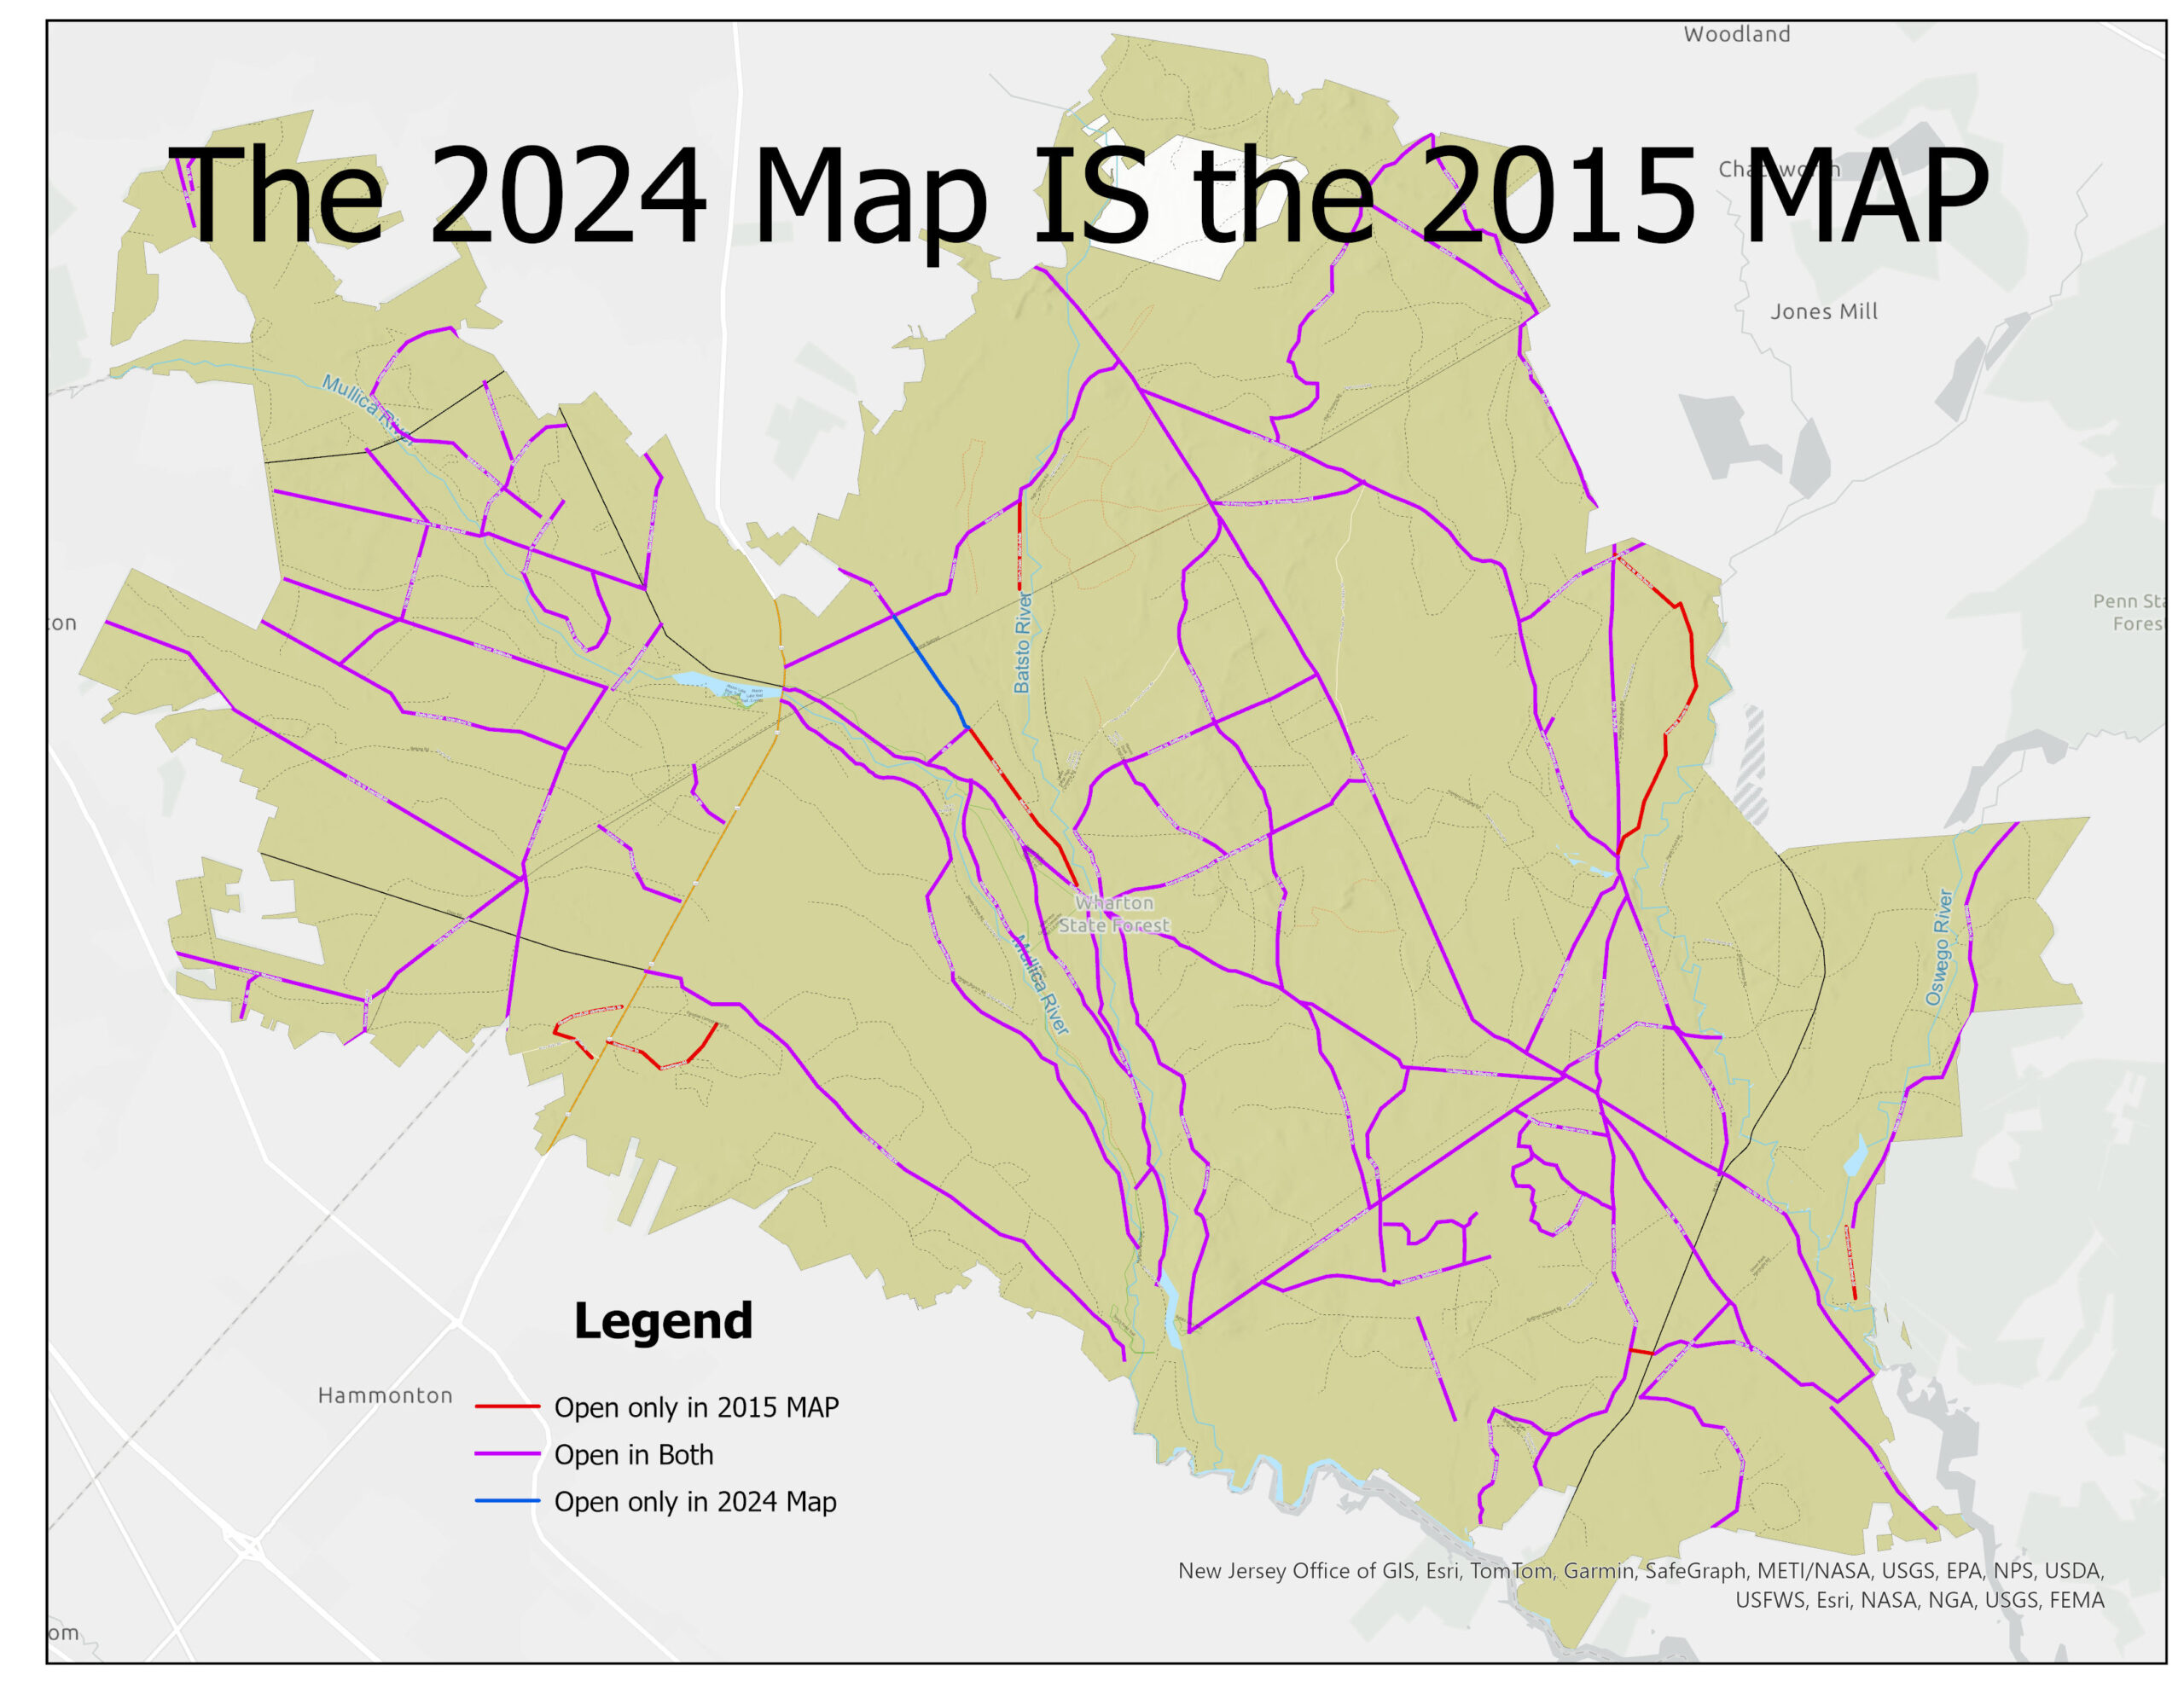 The 2024 Map IS the 2015 MAP.